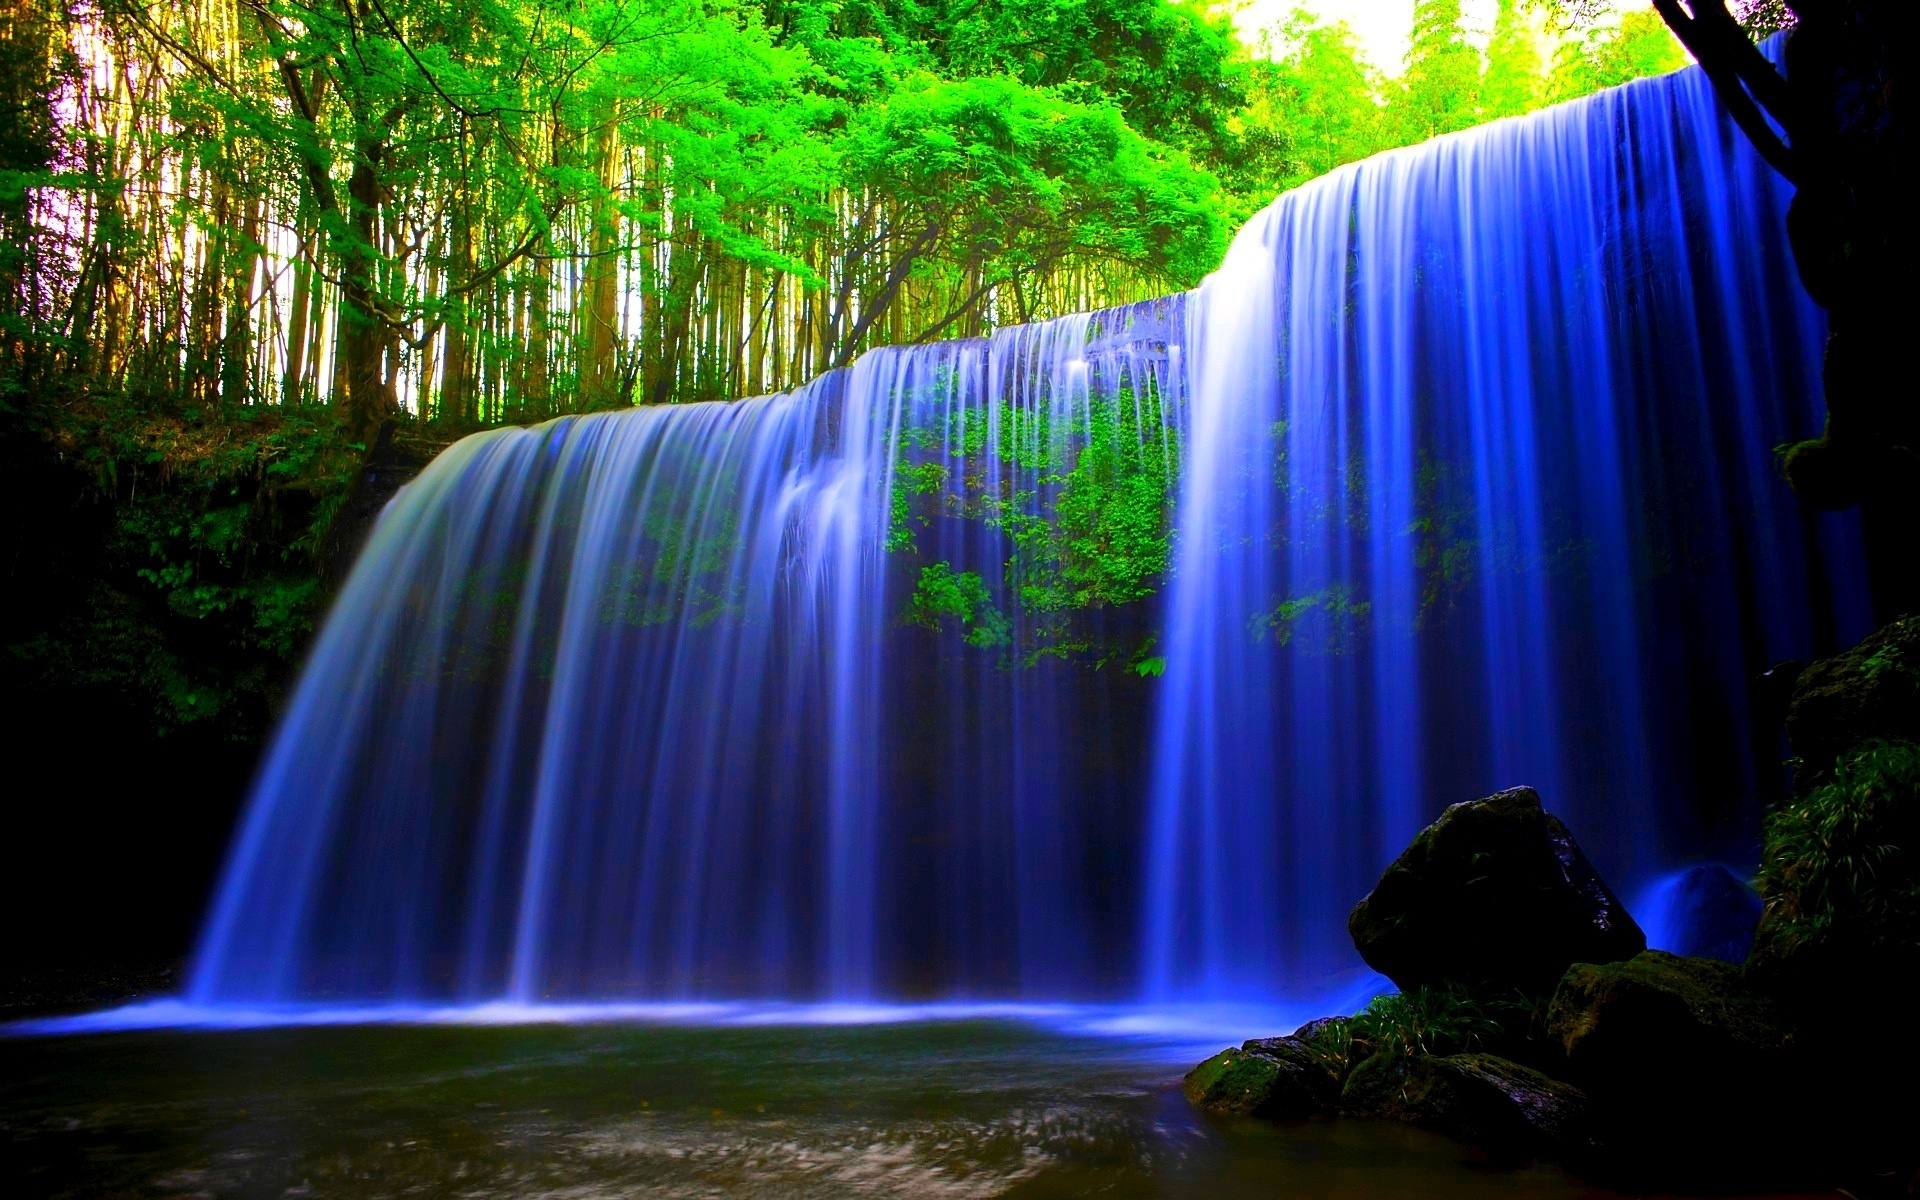  wallpaper free download for pc which is under the waterfall wallpapers